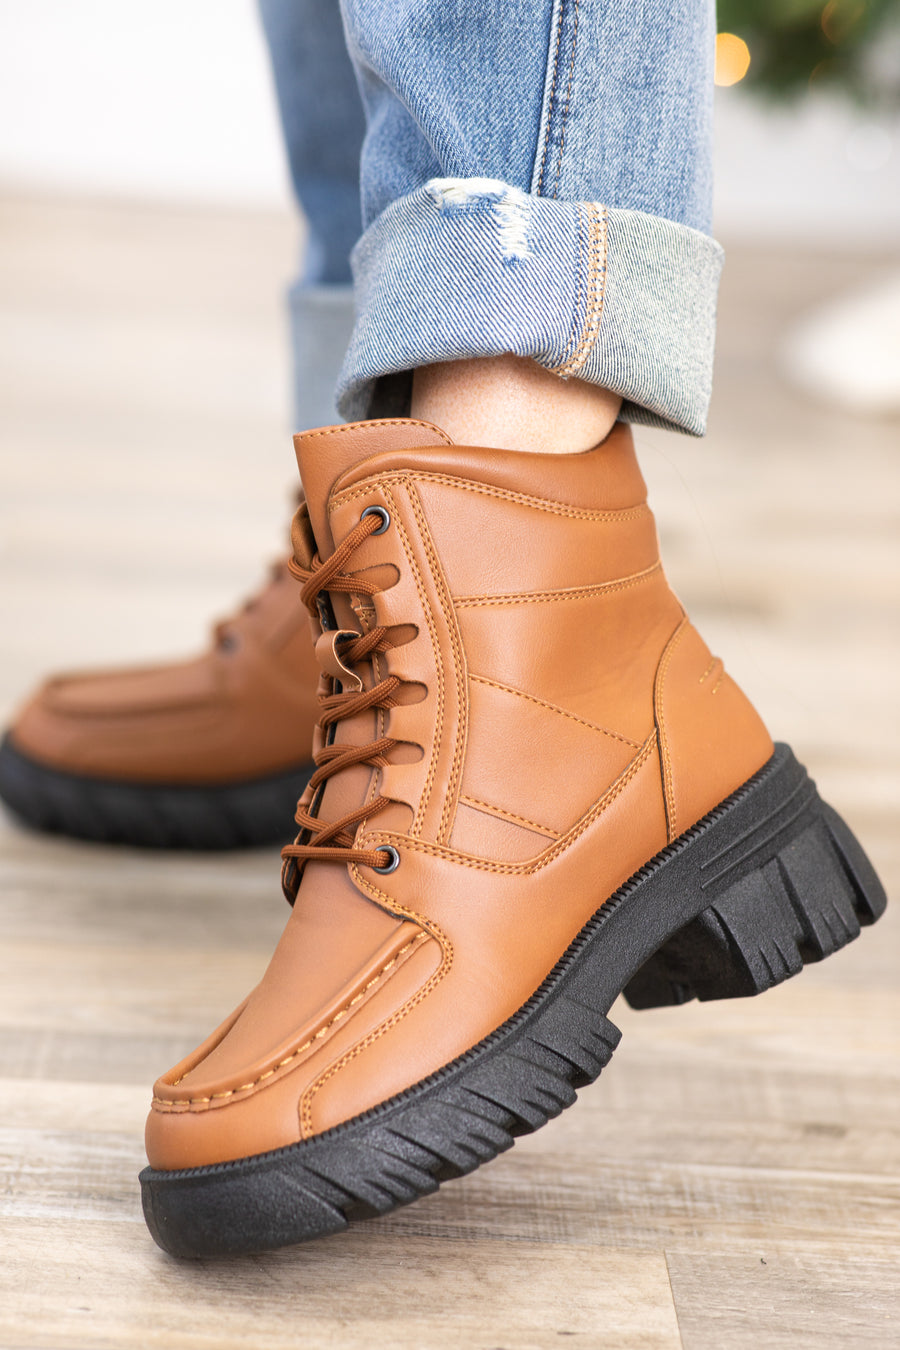 Brown Lace Up Boots With Black Lug Sole